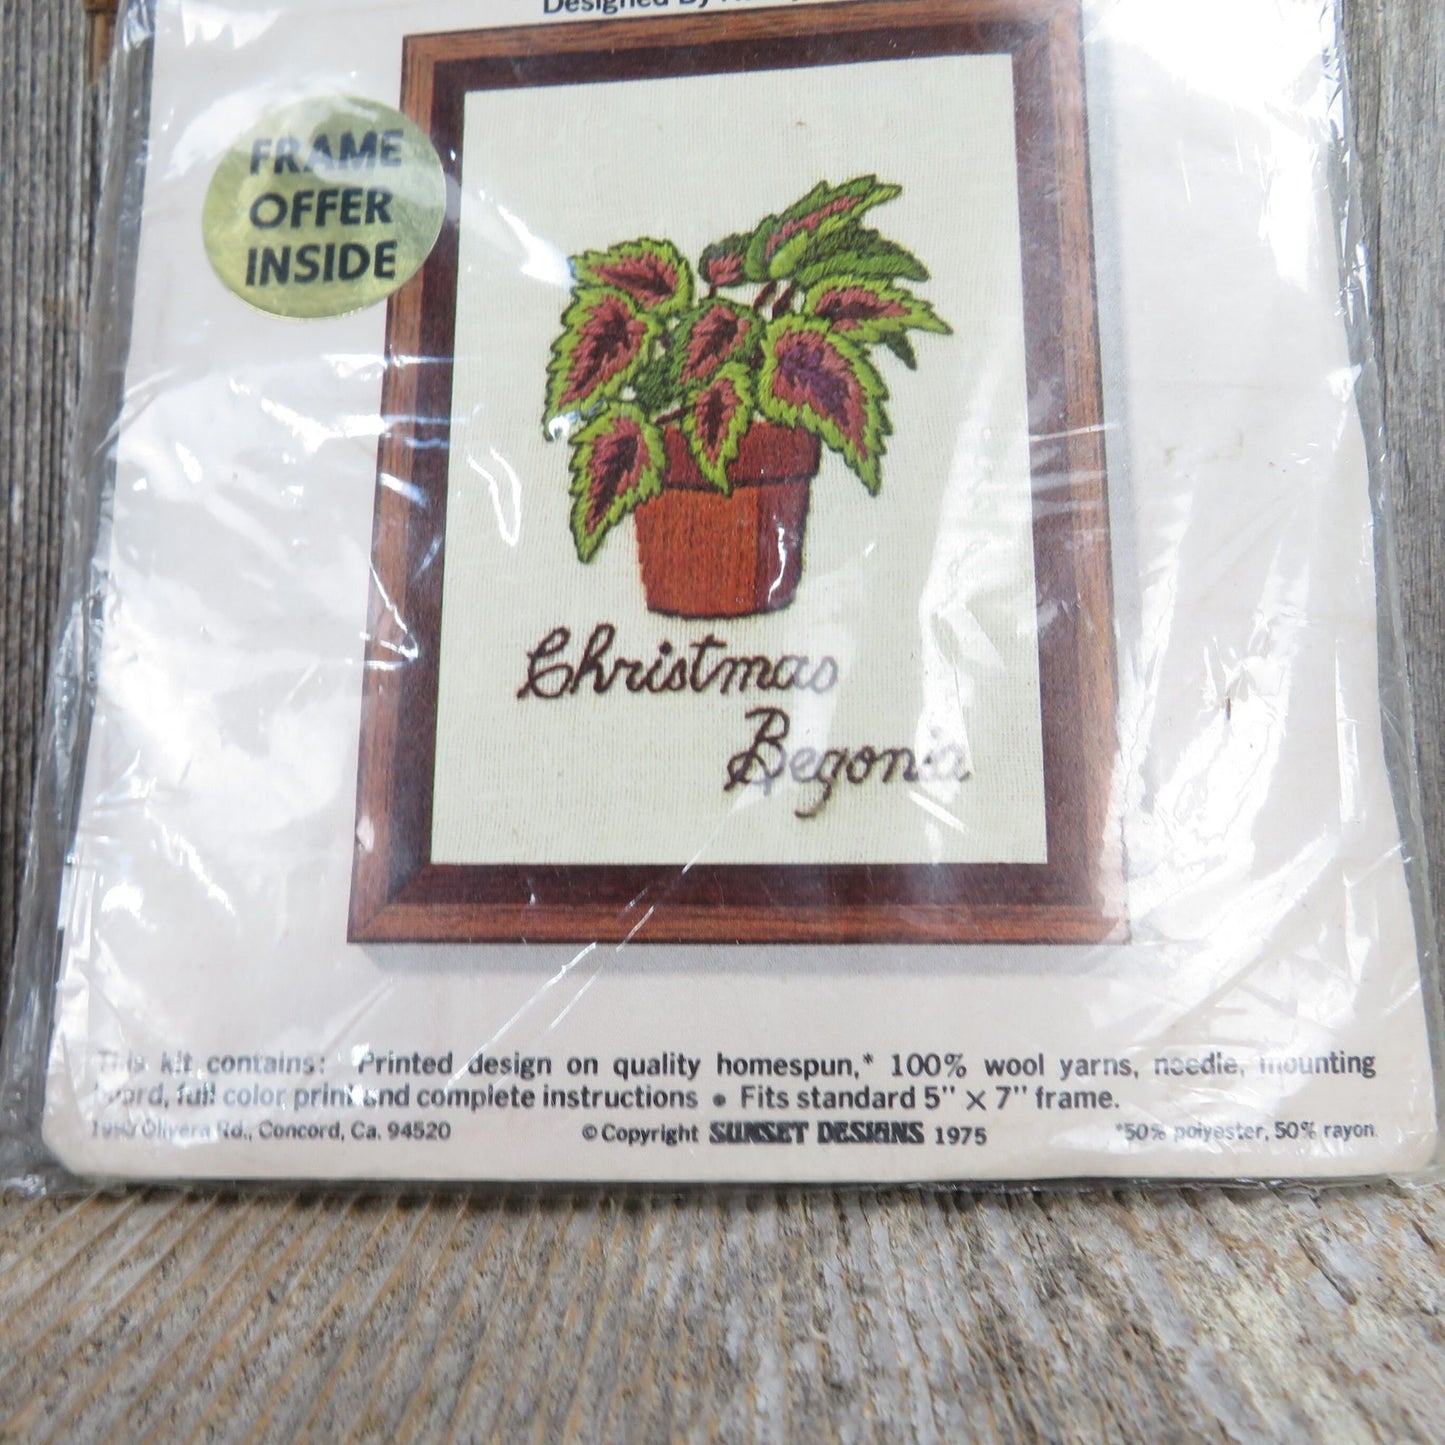 Vintage Crewel Embroidery Kit Christmas Begonia Jiffy Stitchery Sunset Designs Plants Floral #332